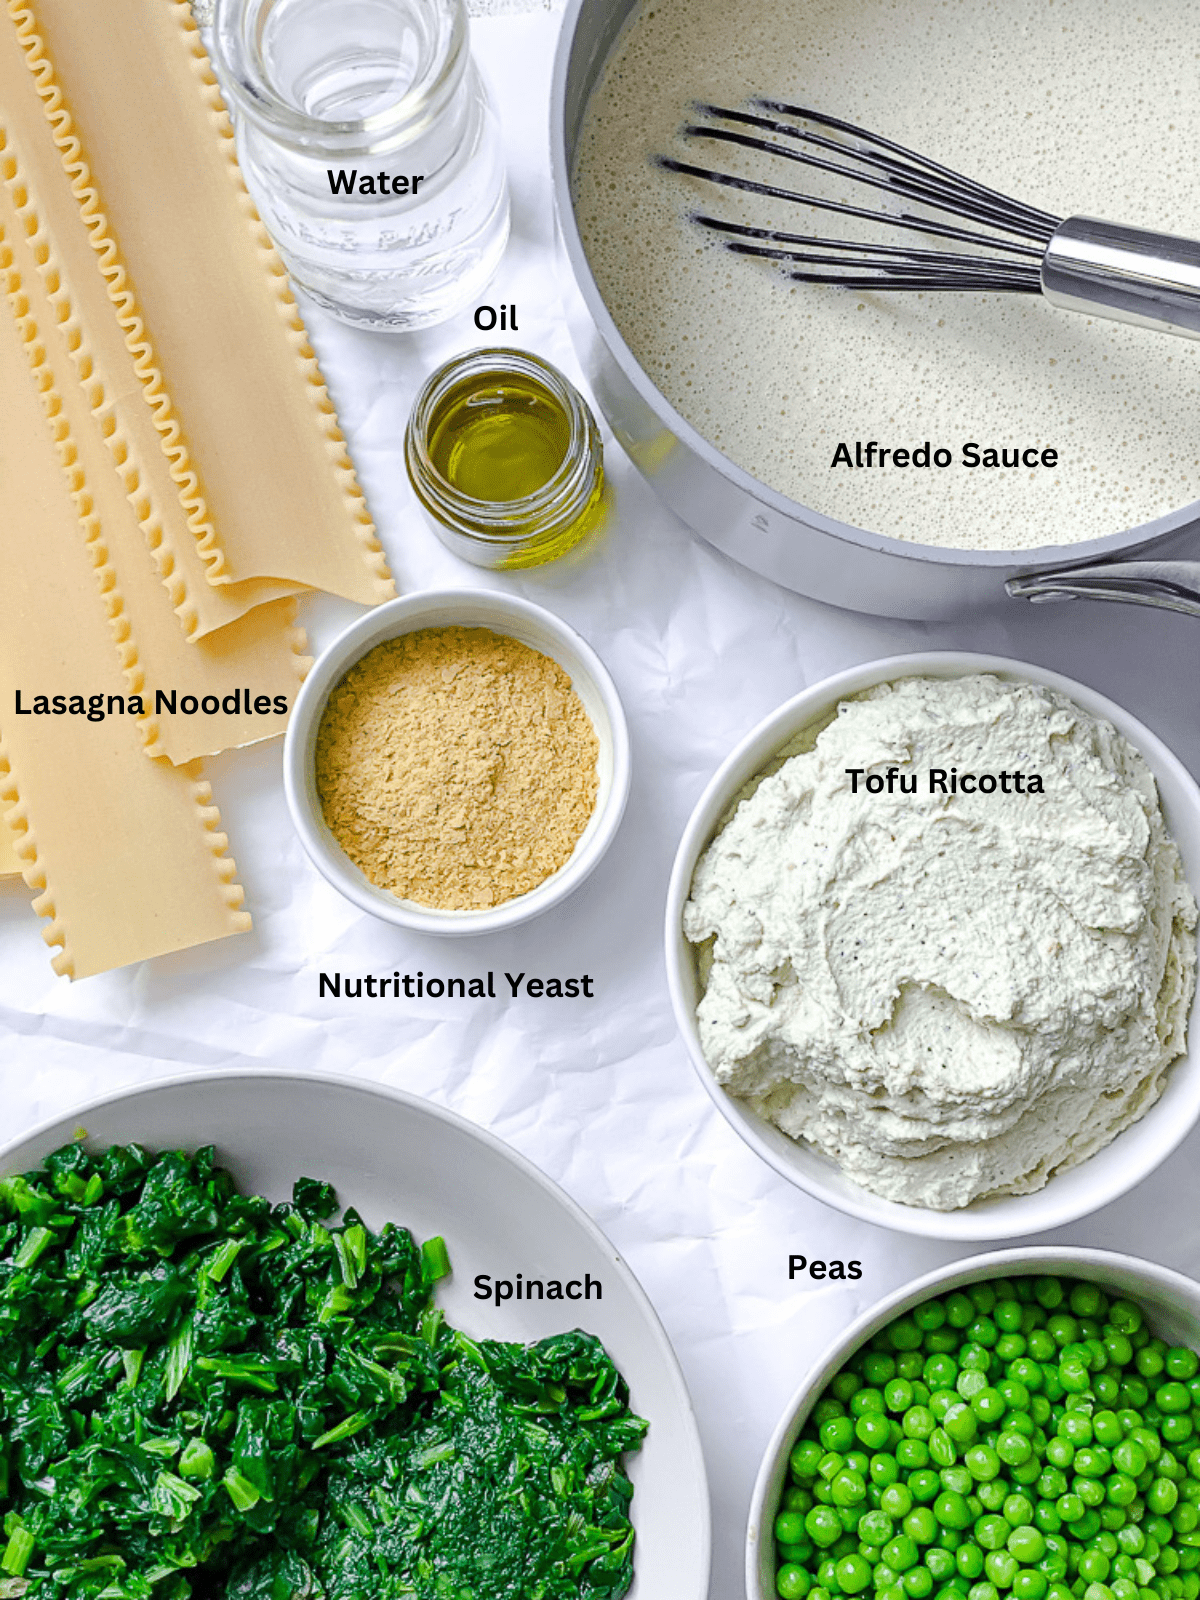 ingredients for Vegan White Lasagna measured out on a white surface
